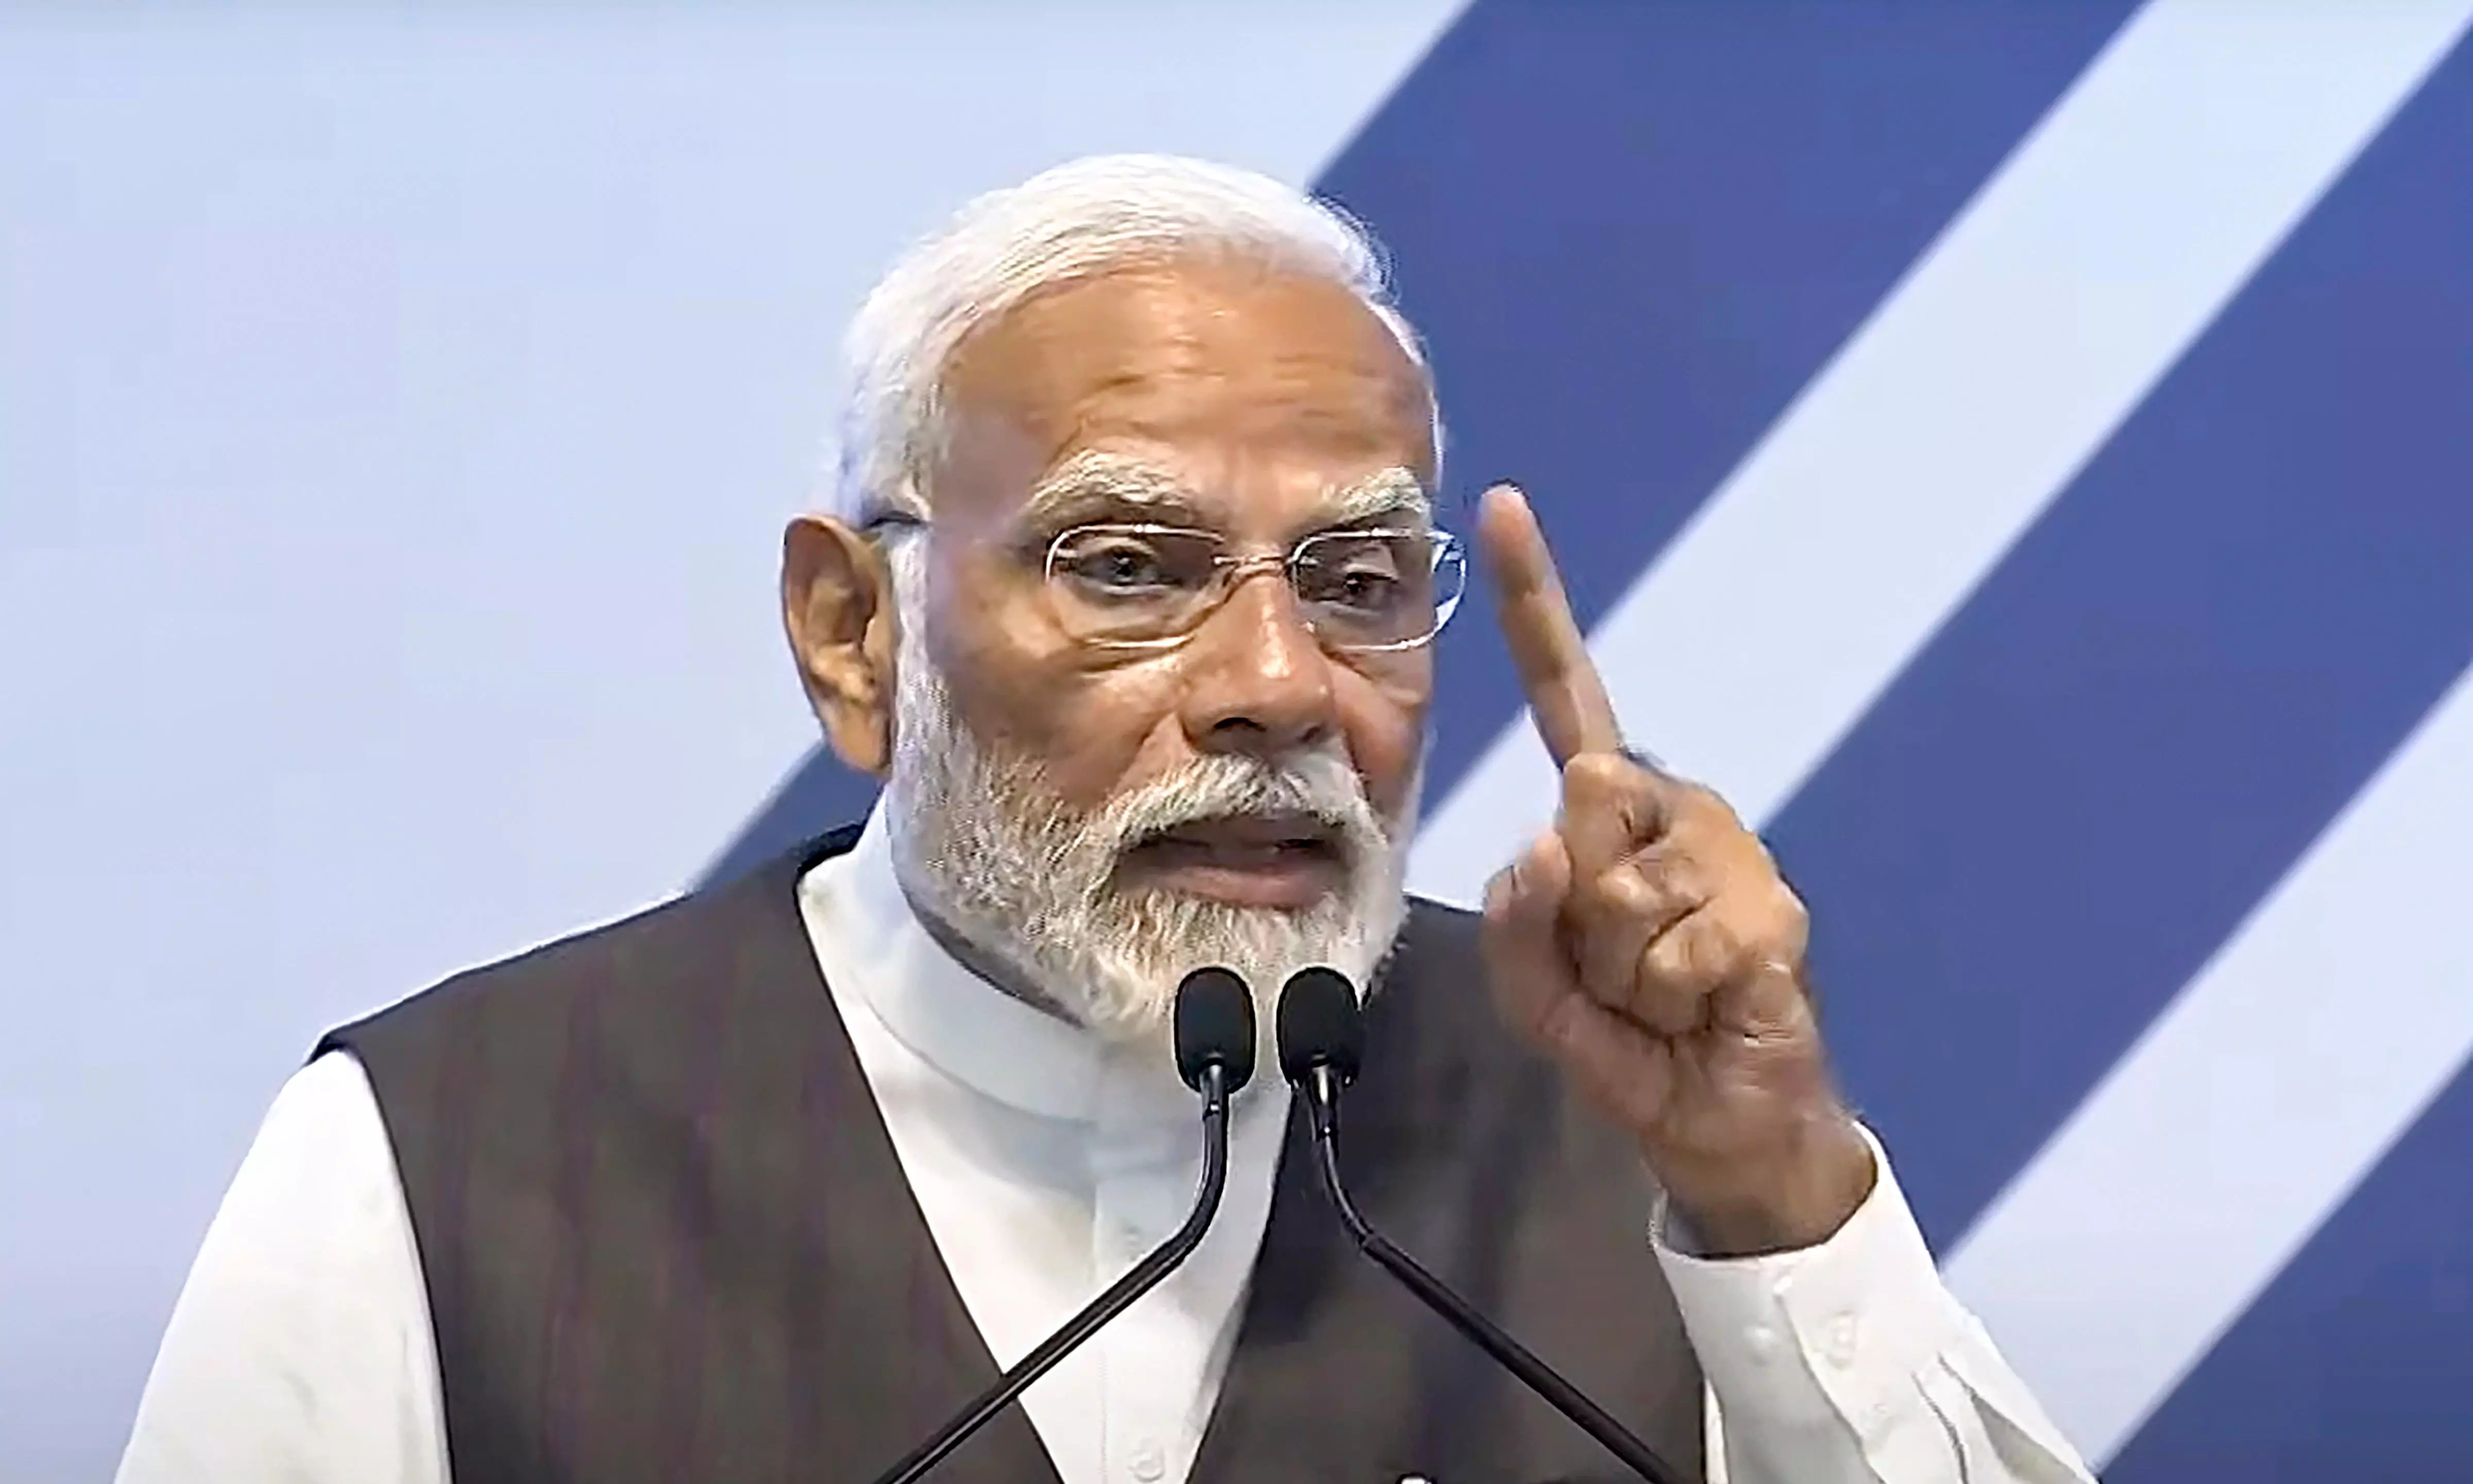 Women, youths can rid country of evils of nepotism, corruption: PM Modi